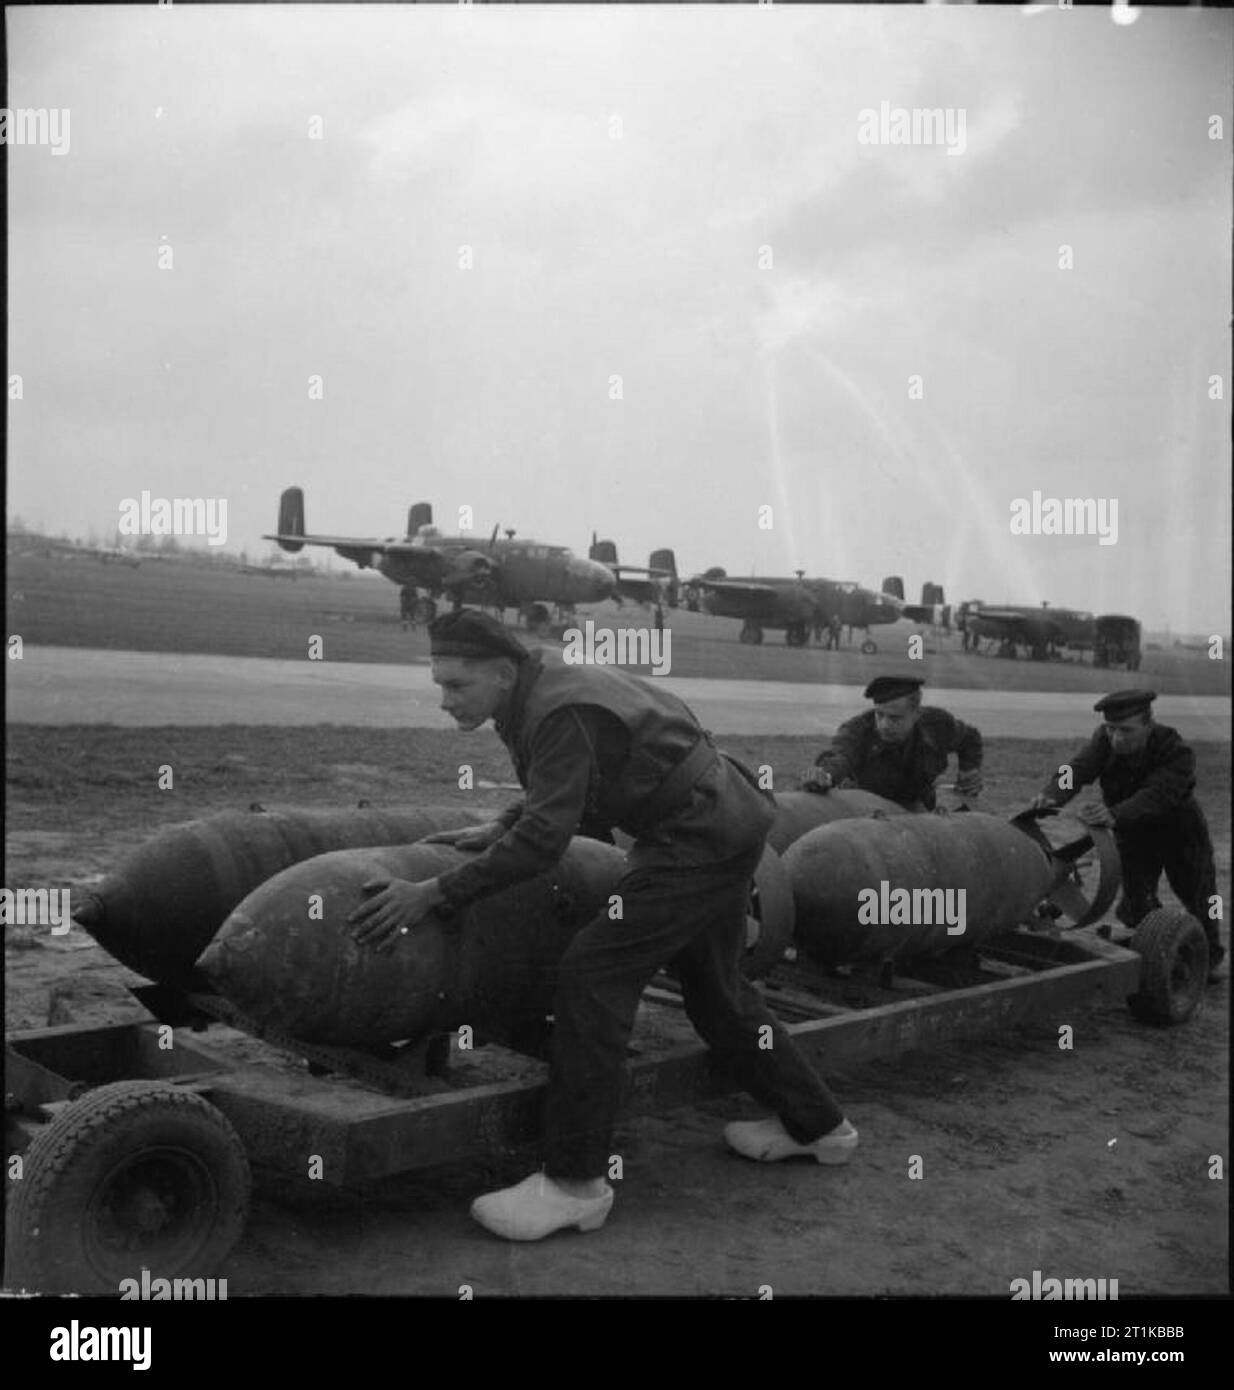 Royal Air Force- 2nd Tactical Air Force, 1943-1945. Ground crew of the Royal Dutch Naval Air Service, serving with No. 320 (Dutch) Squadron RAF, push a trolley of 1,000-lb MC bombs to waiting North American Mitchells at B58/Melsbroek, Belgium. Leading Aircraftman Jan Sieben, in the foreground, is wearing 'klompen' (clogs). Stock Photo